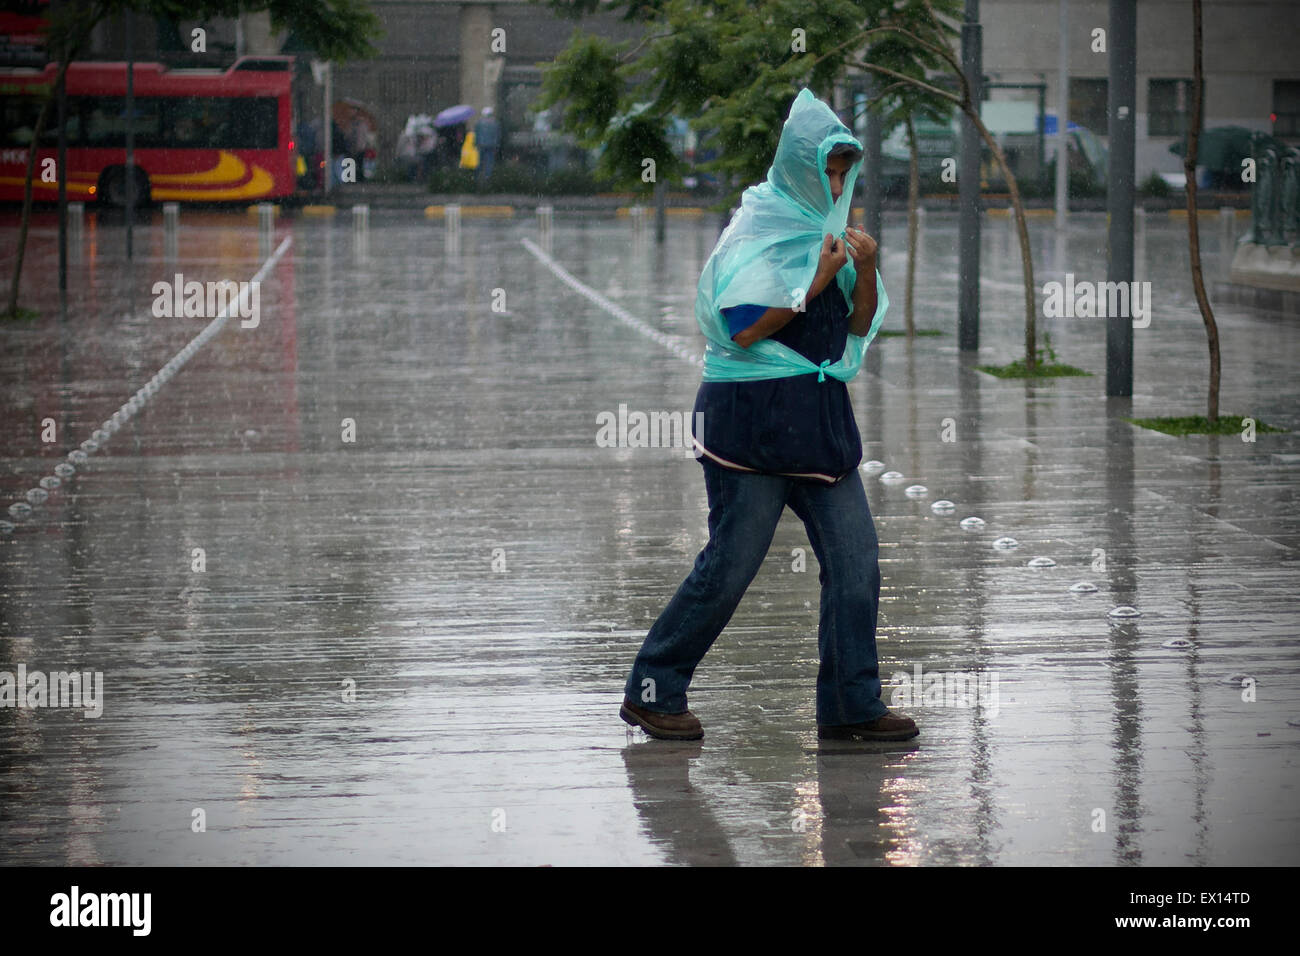 Mexico City, Mexico. 3rd July, 2015. A person walks in the rain in Mexico City, capital of Mexico, on July 3, 2015. According to local press, a low air pressure from the northwest, west and center of Mexico, combined with the entrance of humidity from the Pacific ocean and the Gulf of Mexico, will favor the potential of rains. Credit:  Alejandro Ayala/Xinhua/Alamy Live News Stock Photo